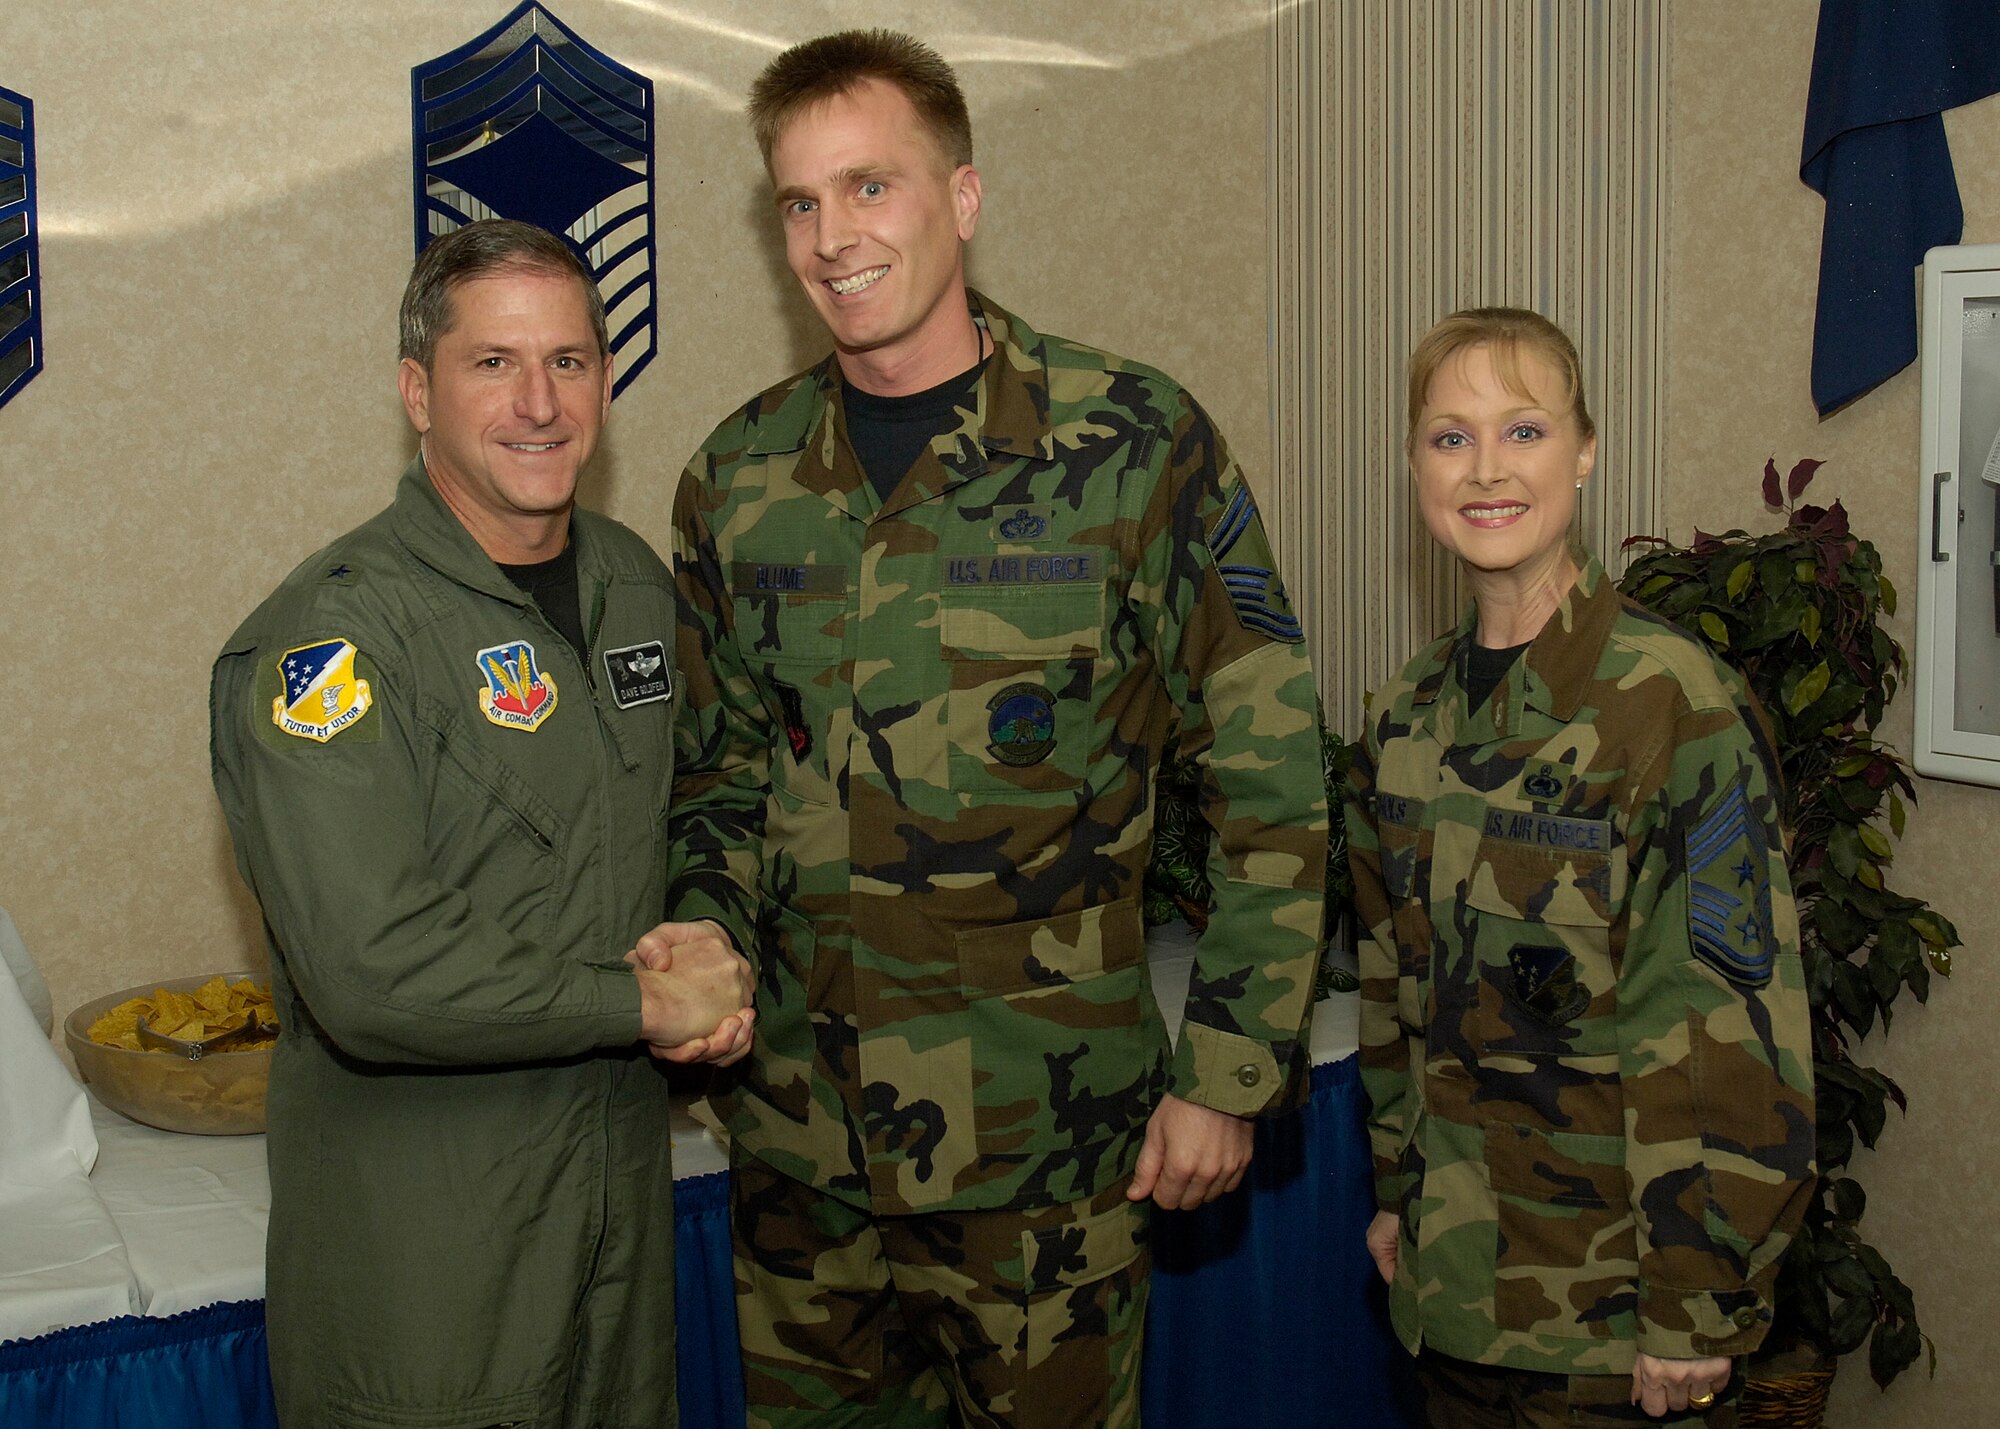 Senior Master Sgt. Larry Blume, 49th Civil Engineer Squadron superintendent, is congratulated by Brig. Gen. David Goldfein, 49th Fighter Wing commander and Chief Master Sgt. Marjorie McNichols, 49 FW command chief.